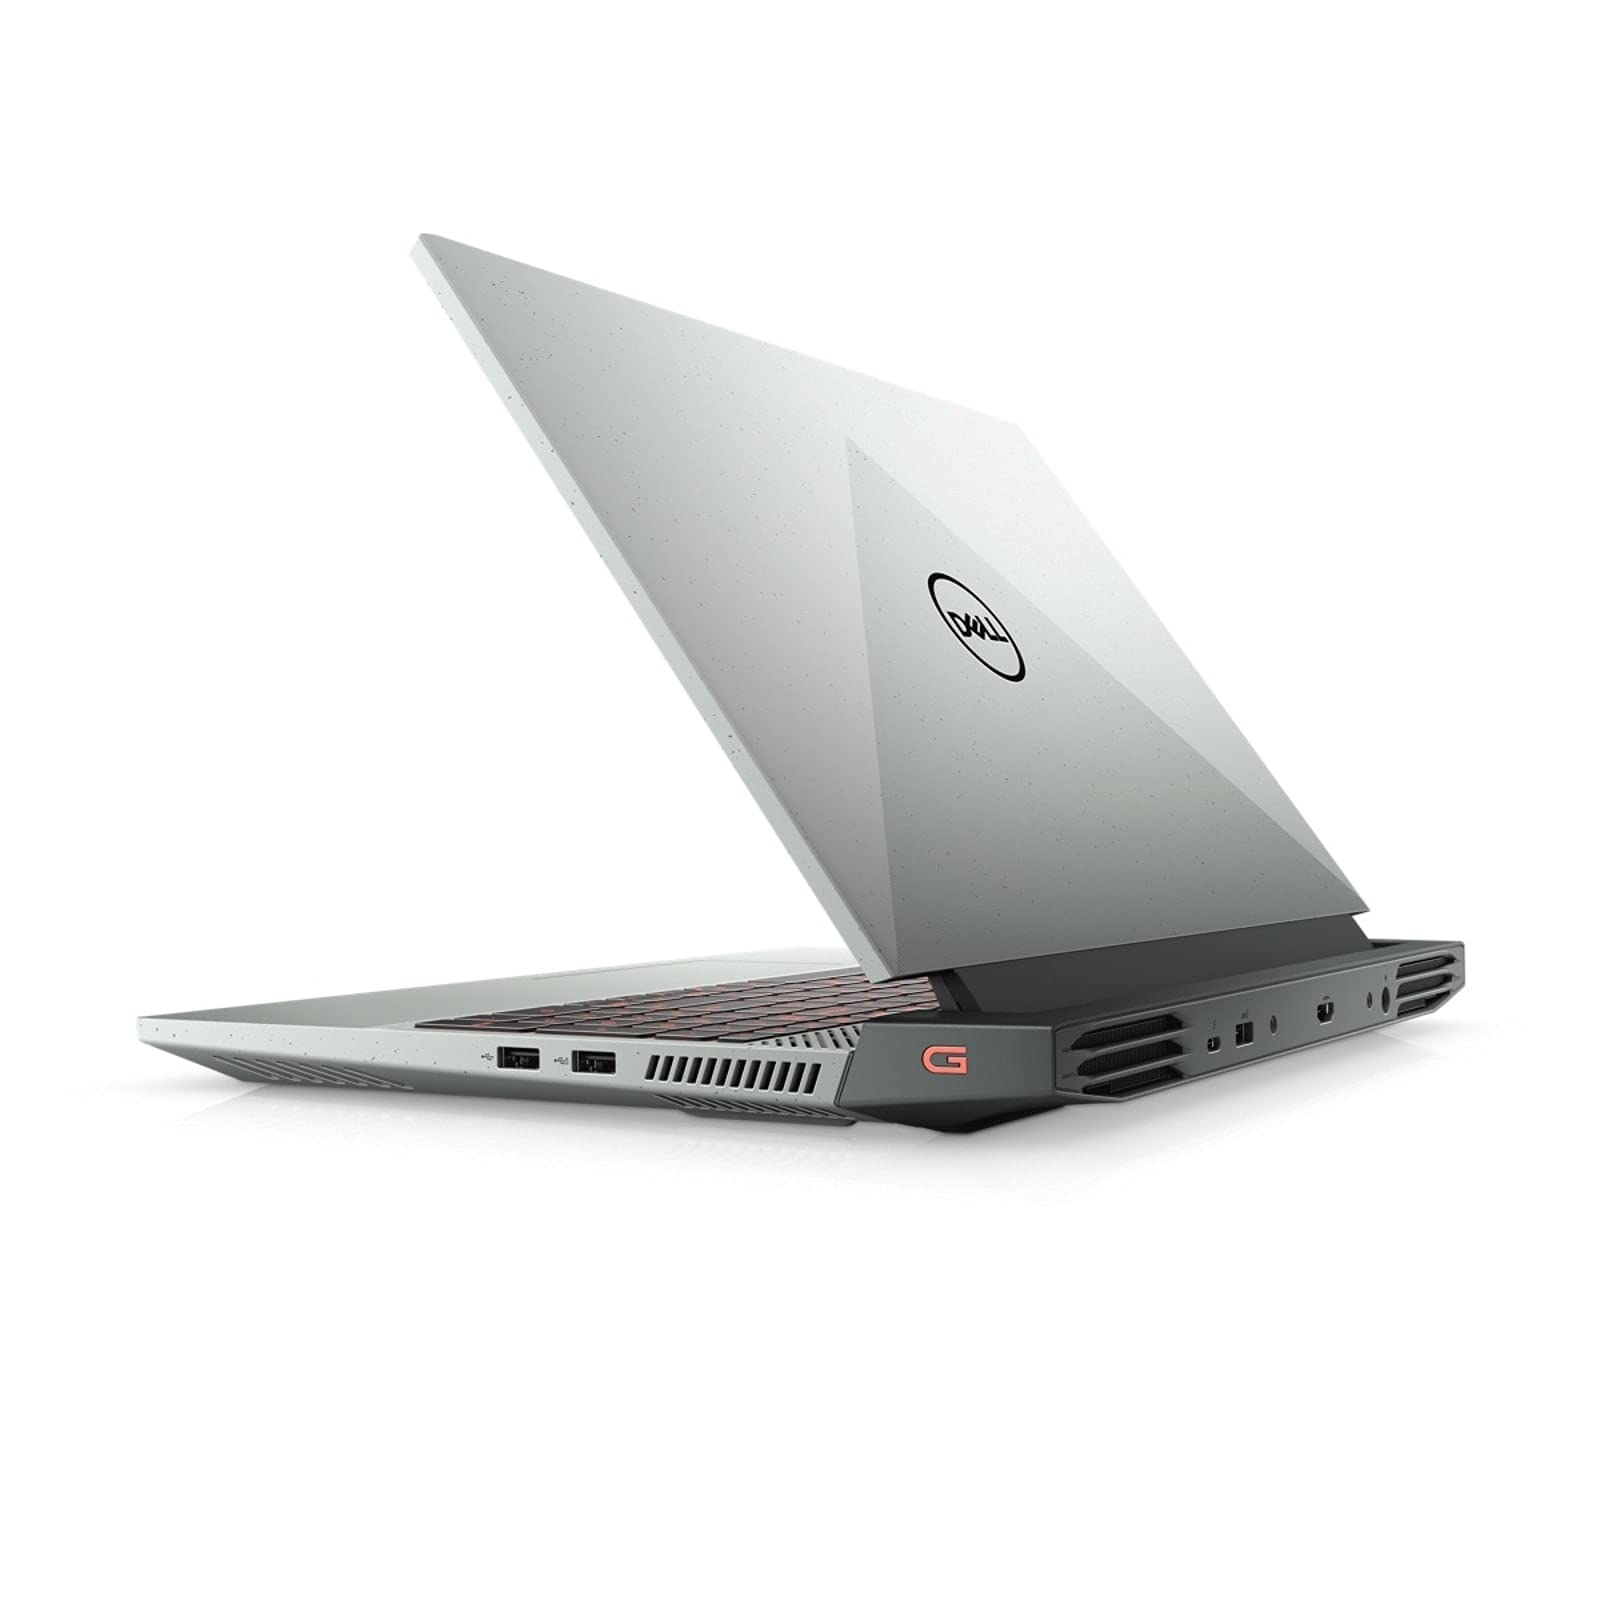 Dell G15 5515 Gaming Laptop (2021) | 15.6